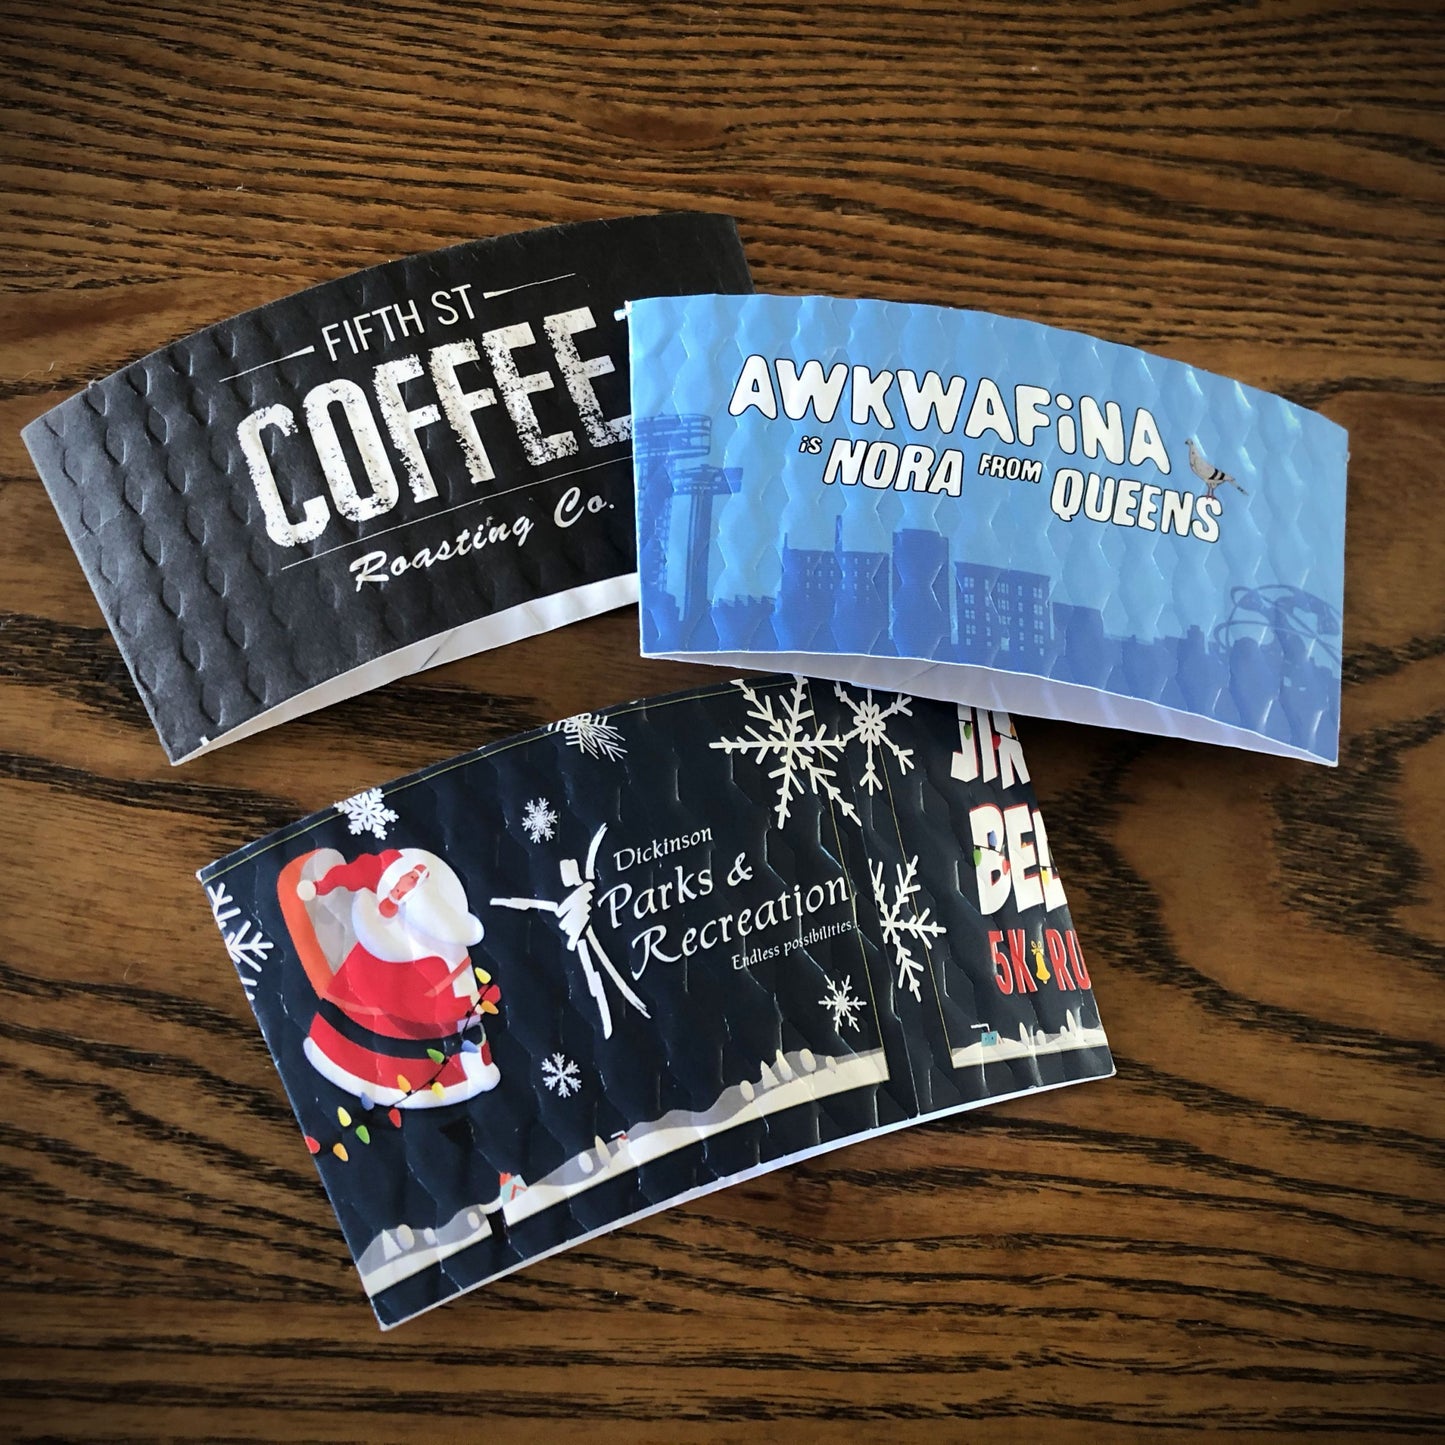 Full color custom printed coffee cup sleeves - assortment